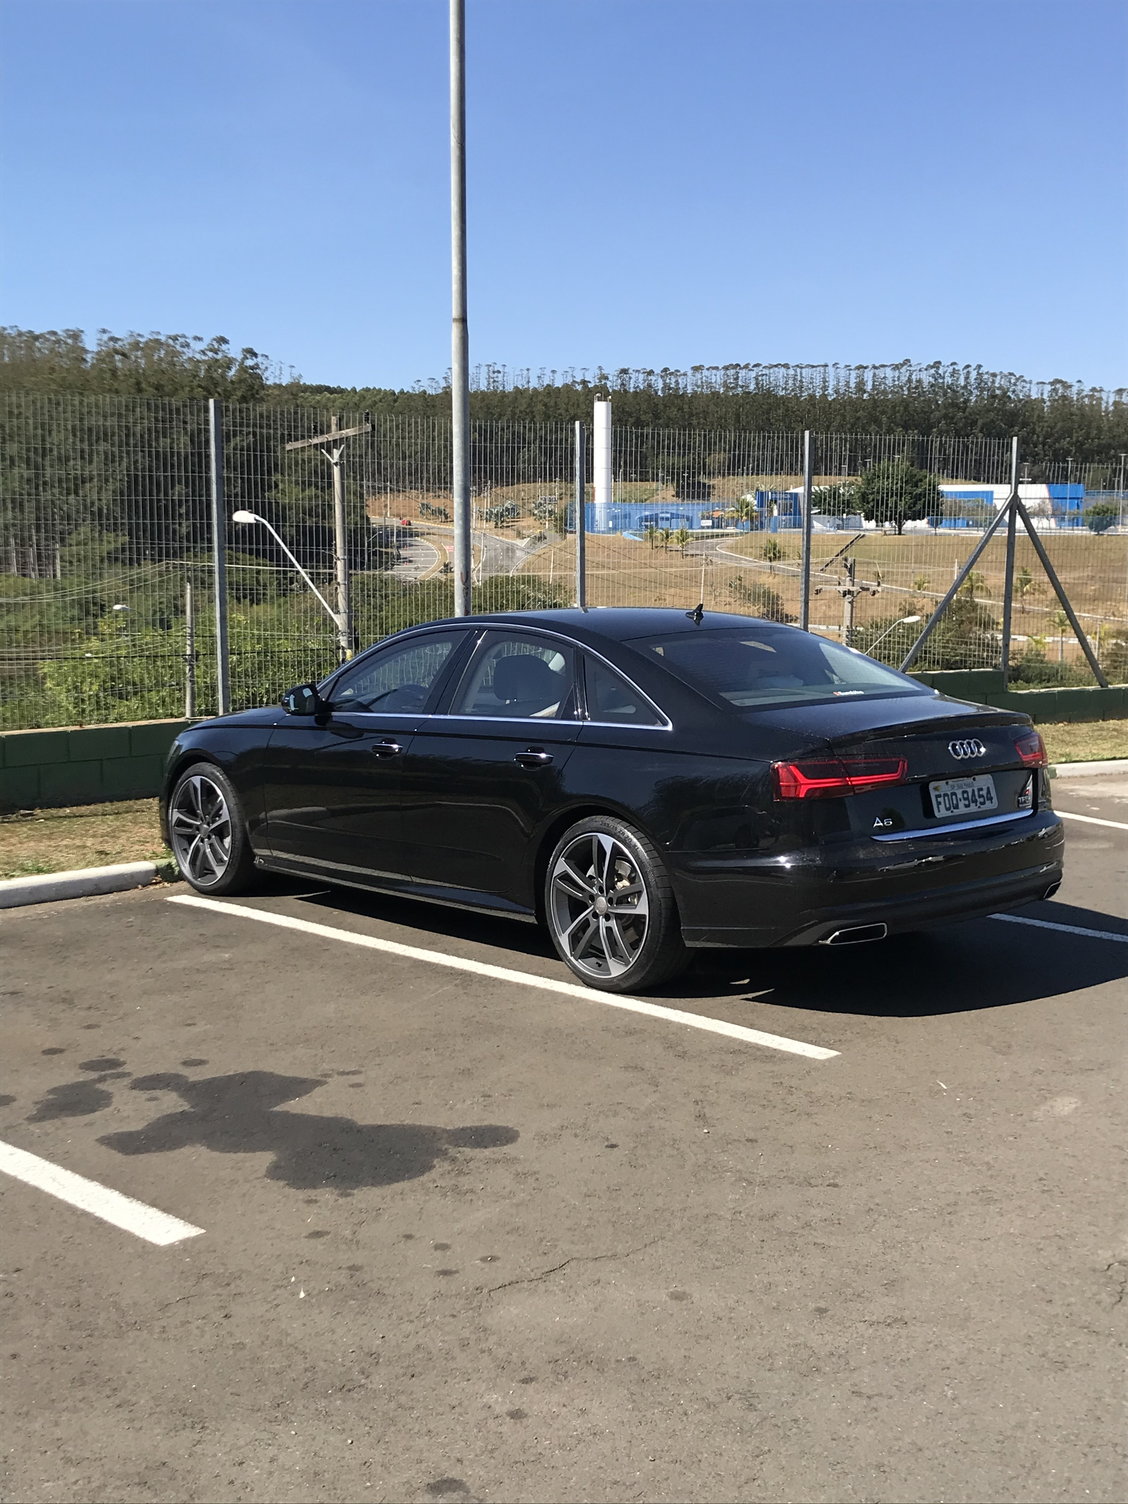 Official A6 (c7) Picture thread! - Page 120 - AudiWorld Forums